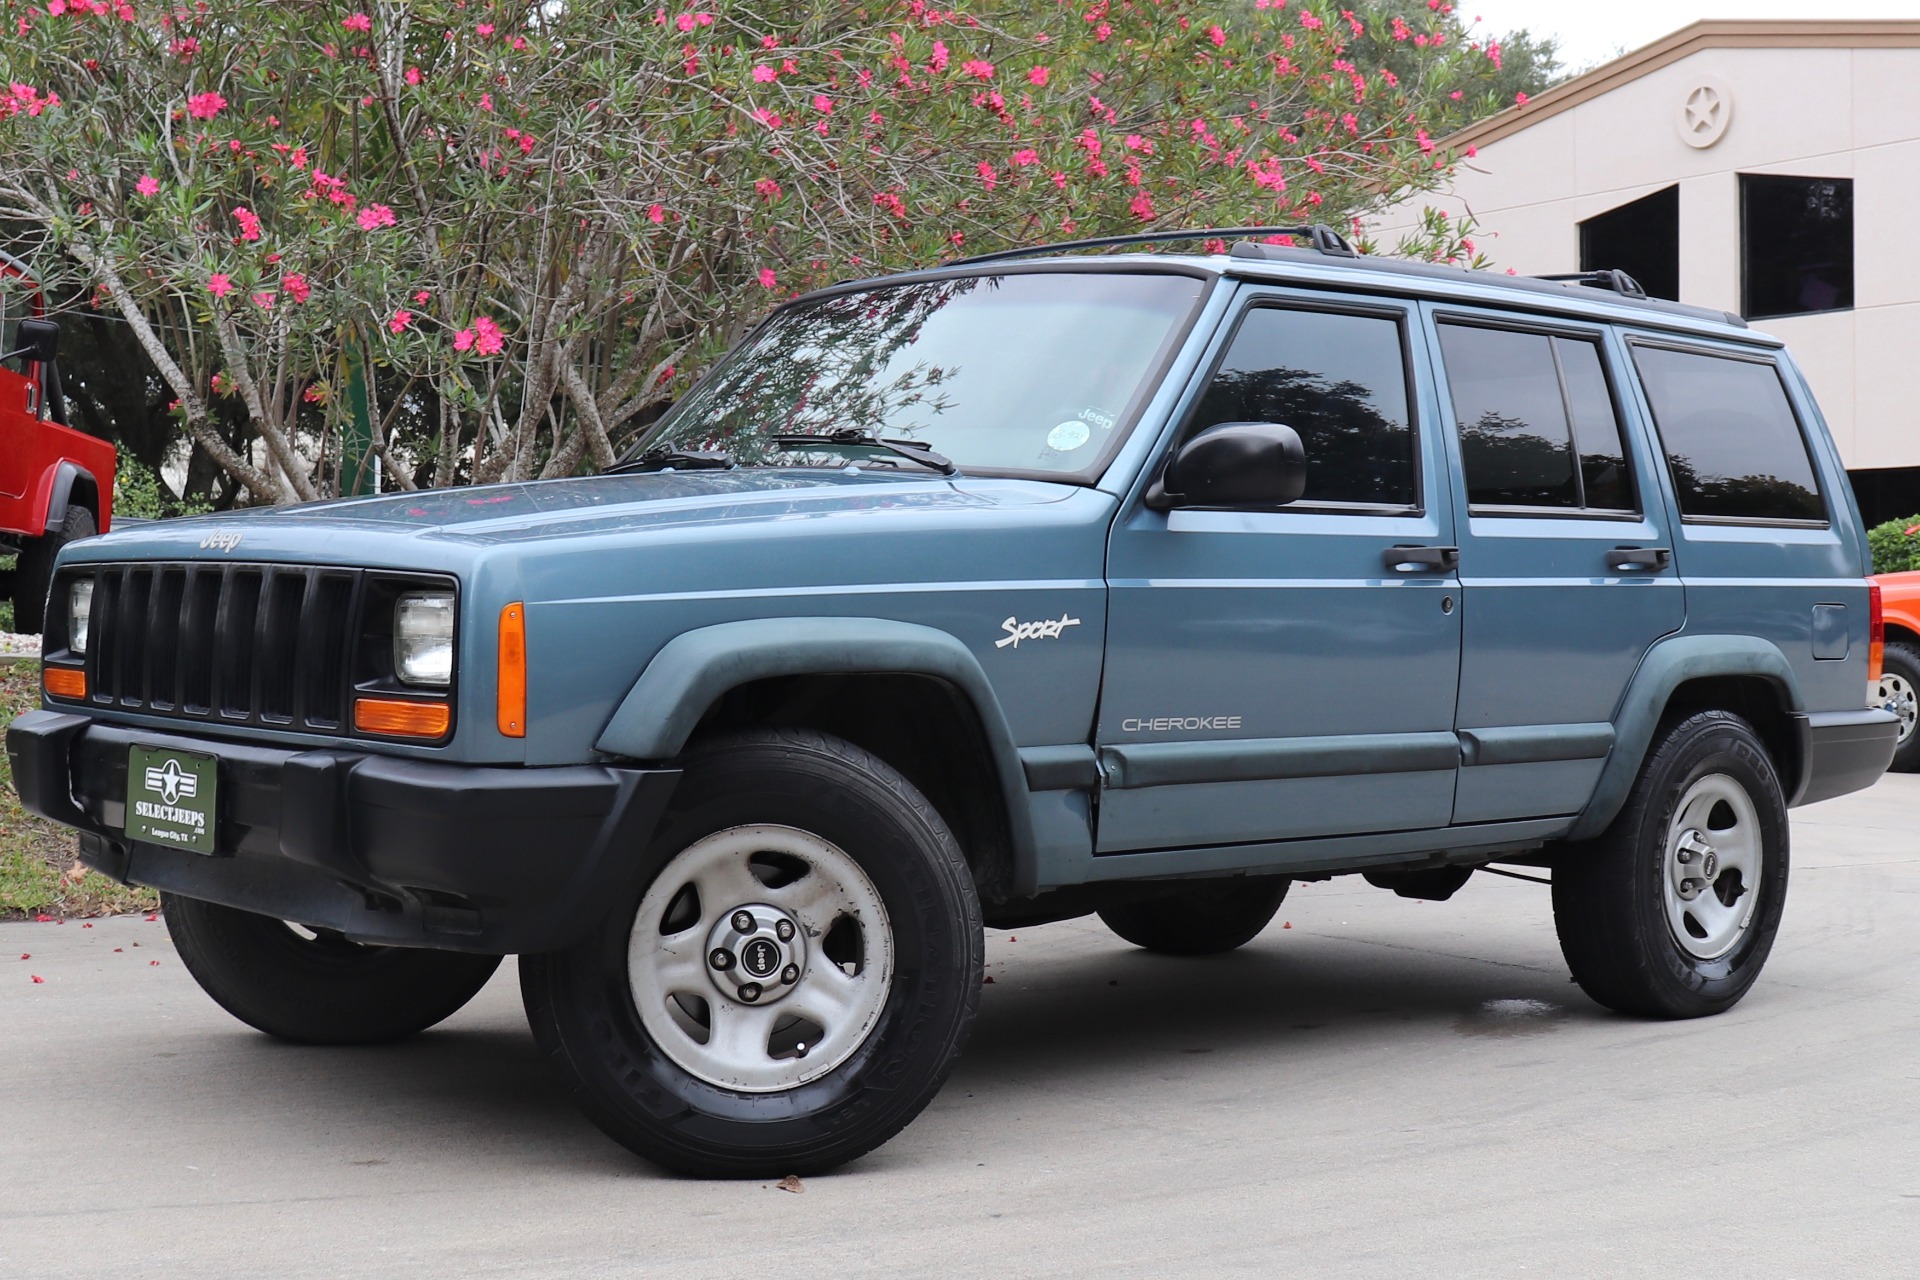 Used 1997 Jeep Cherokee Sport For Sale 3995 Select Jeeps Inc